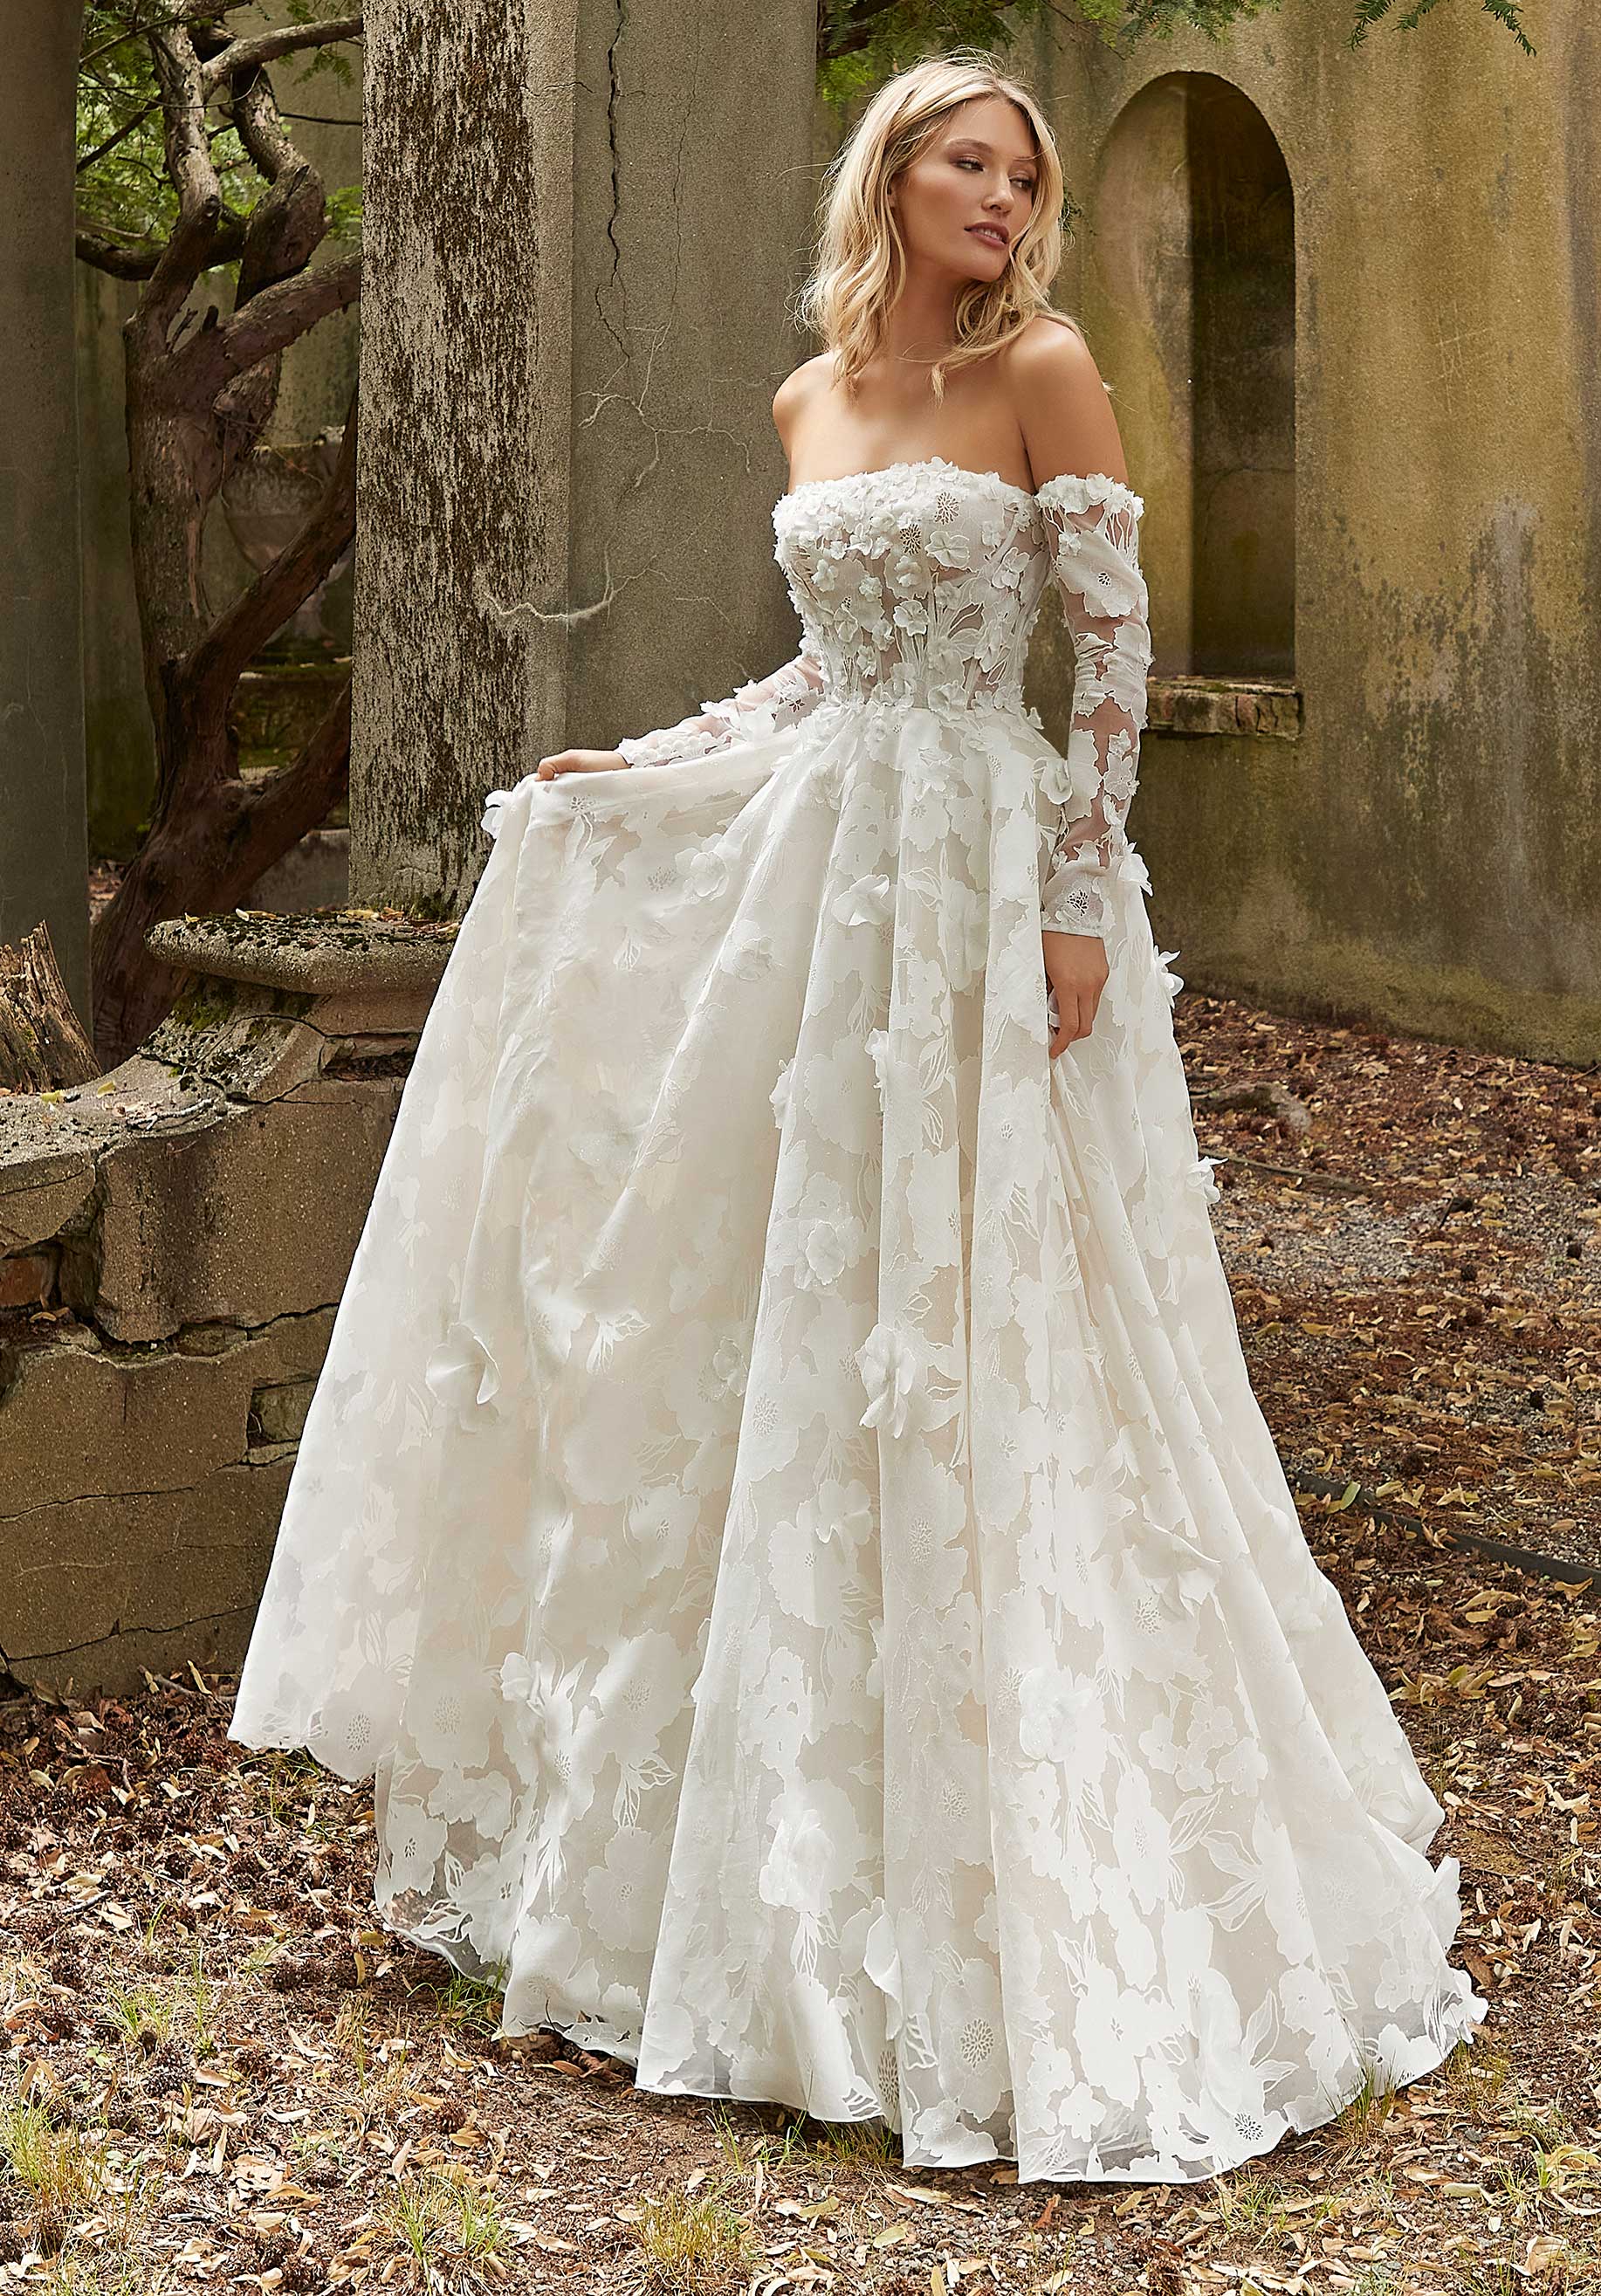 Stylish Wedding Dresses for Girls in Unique Designs